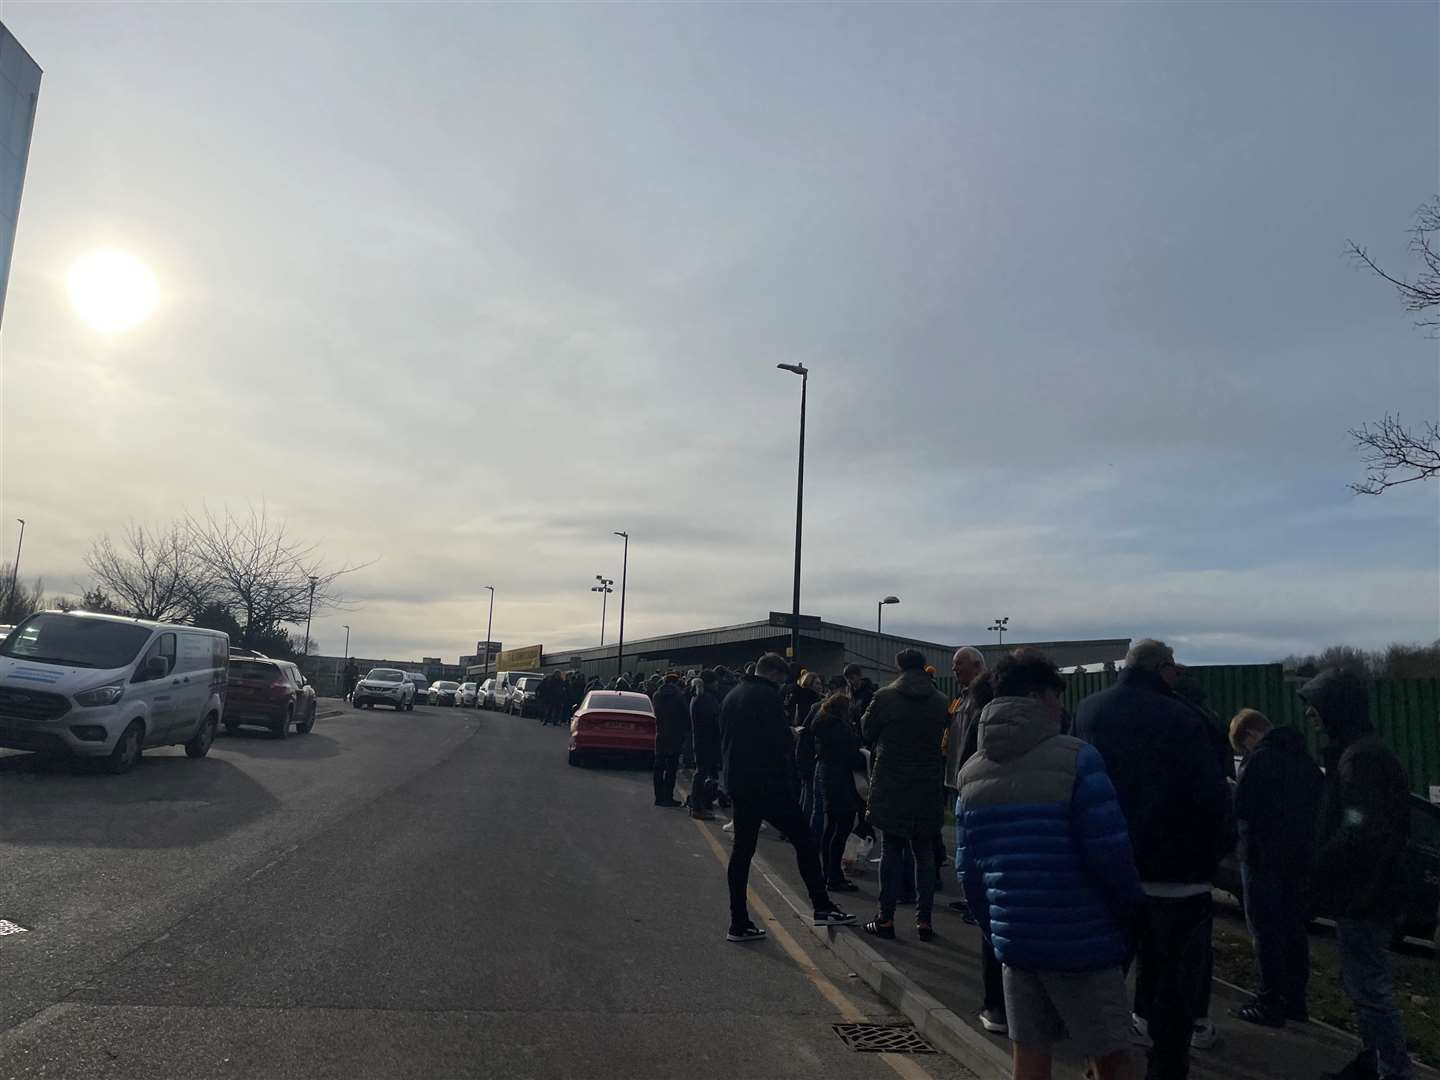 Football fans queuing for tickets for Maidstone United's FA Cup fourth round match with Ipswich, which go on sale today